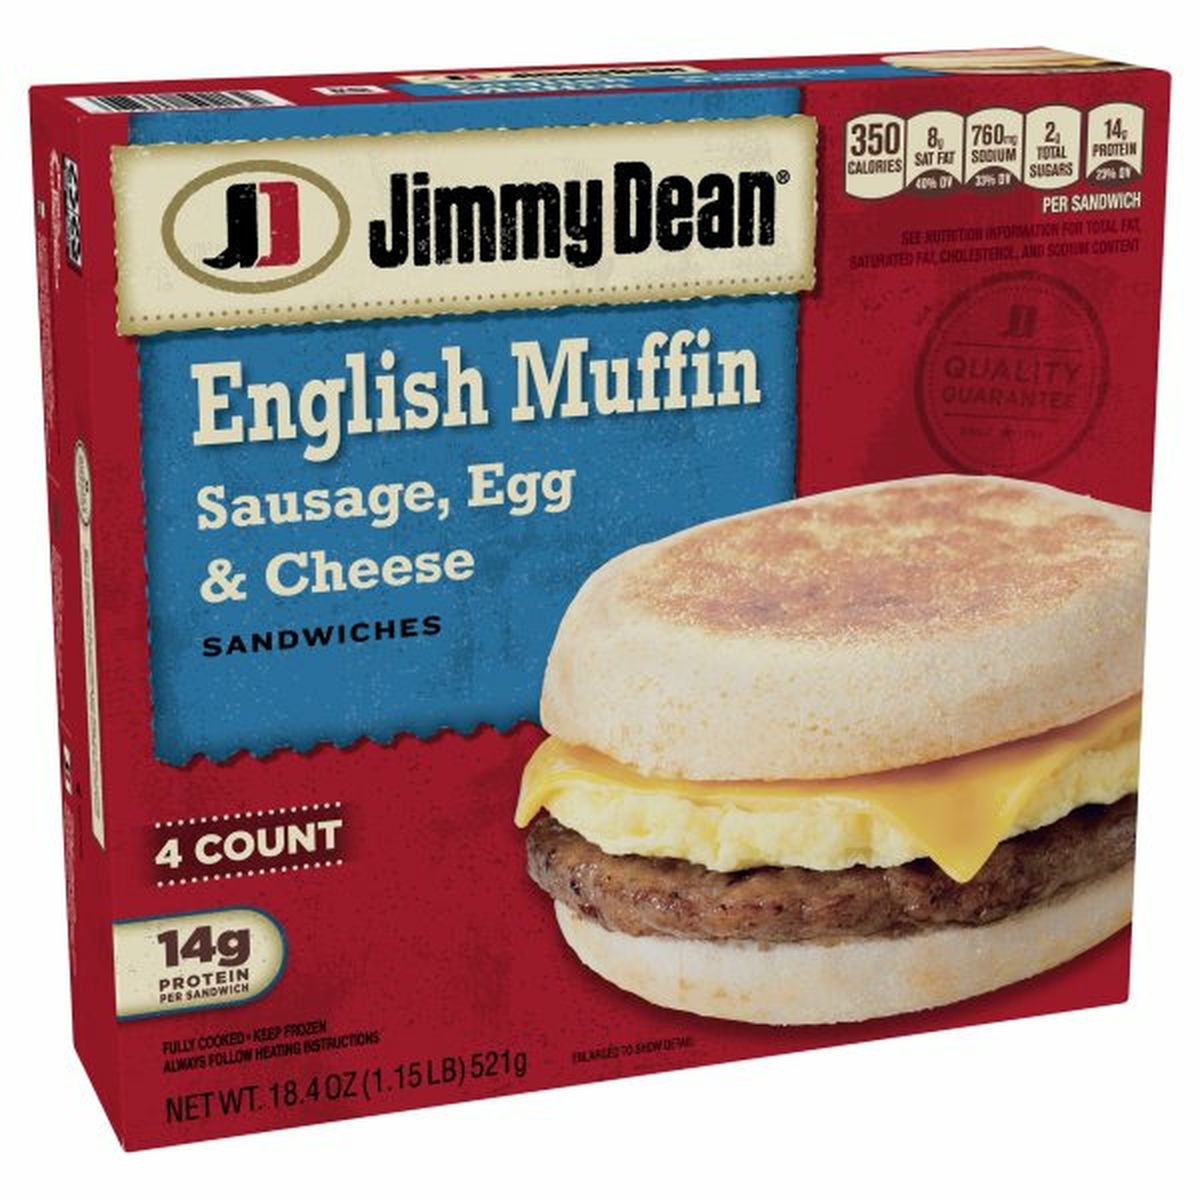 Calories in Jimmy Dean Sausage, Egg & Cheese English Muffin Sandwiches, 4 Count (Frozen)